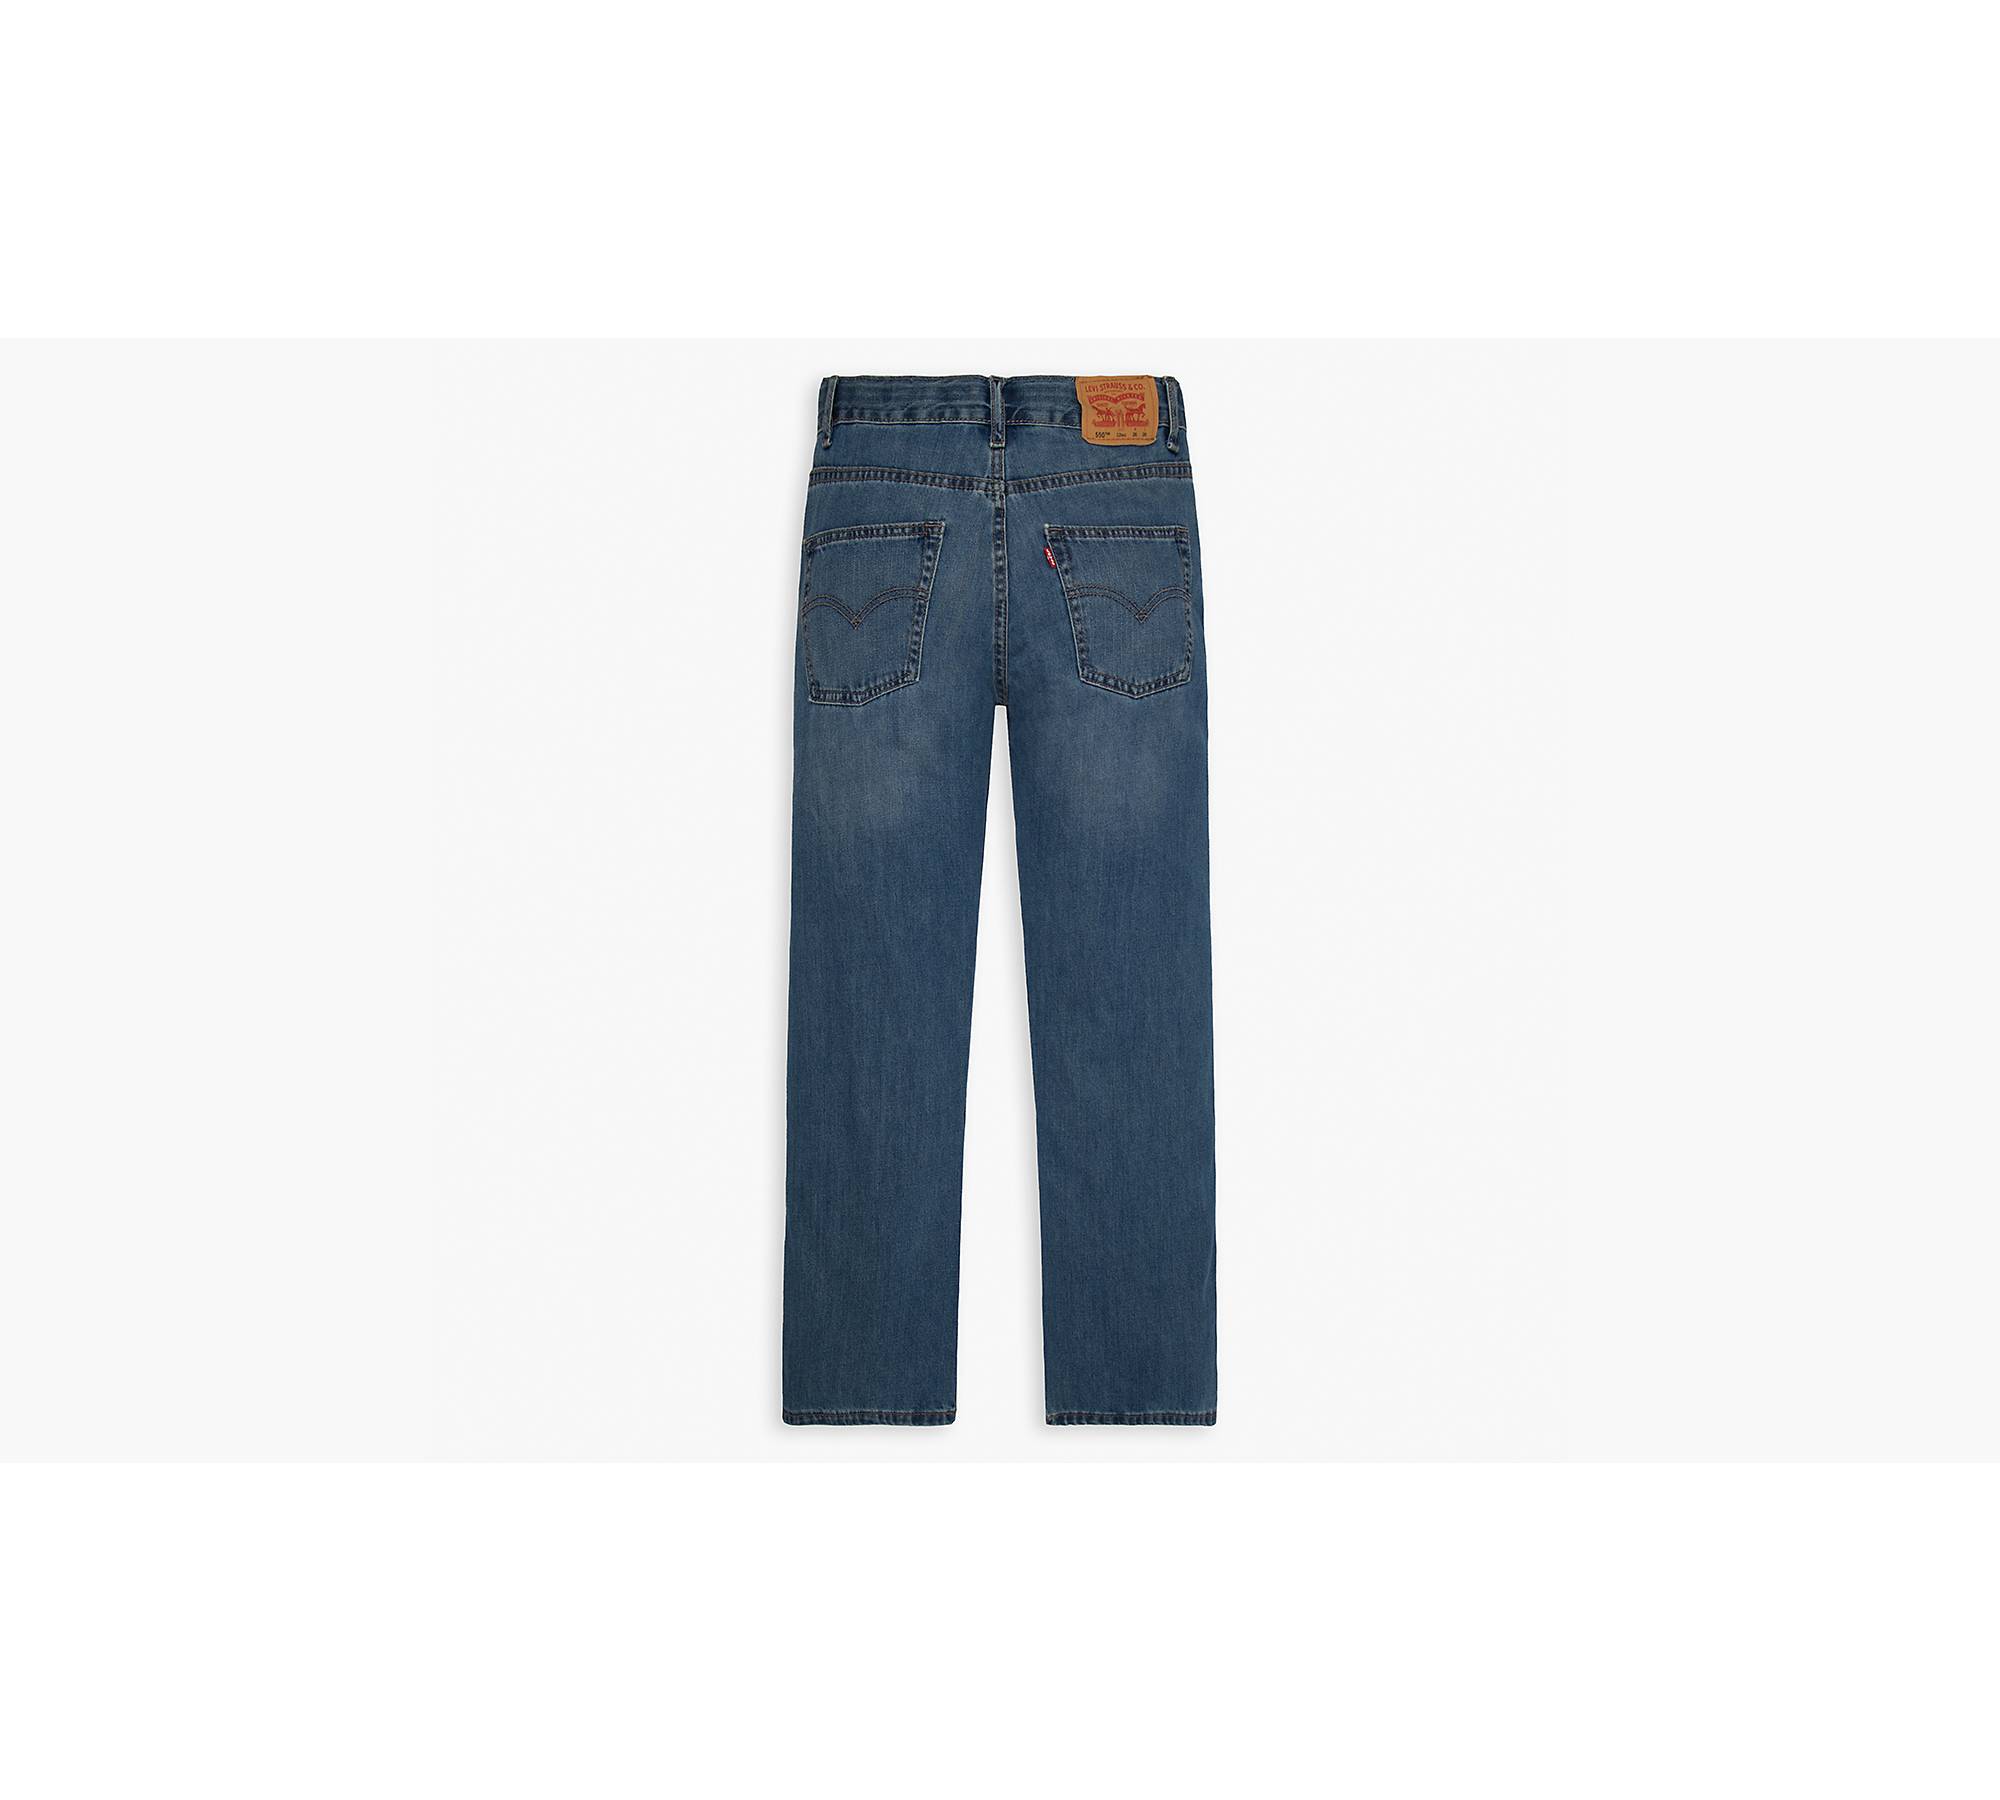 550™ Relaxed Fit Big Boys Jeans 8-20 - Light Wash | Levi's® US